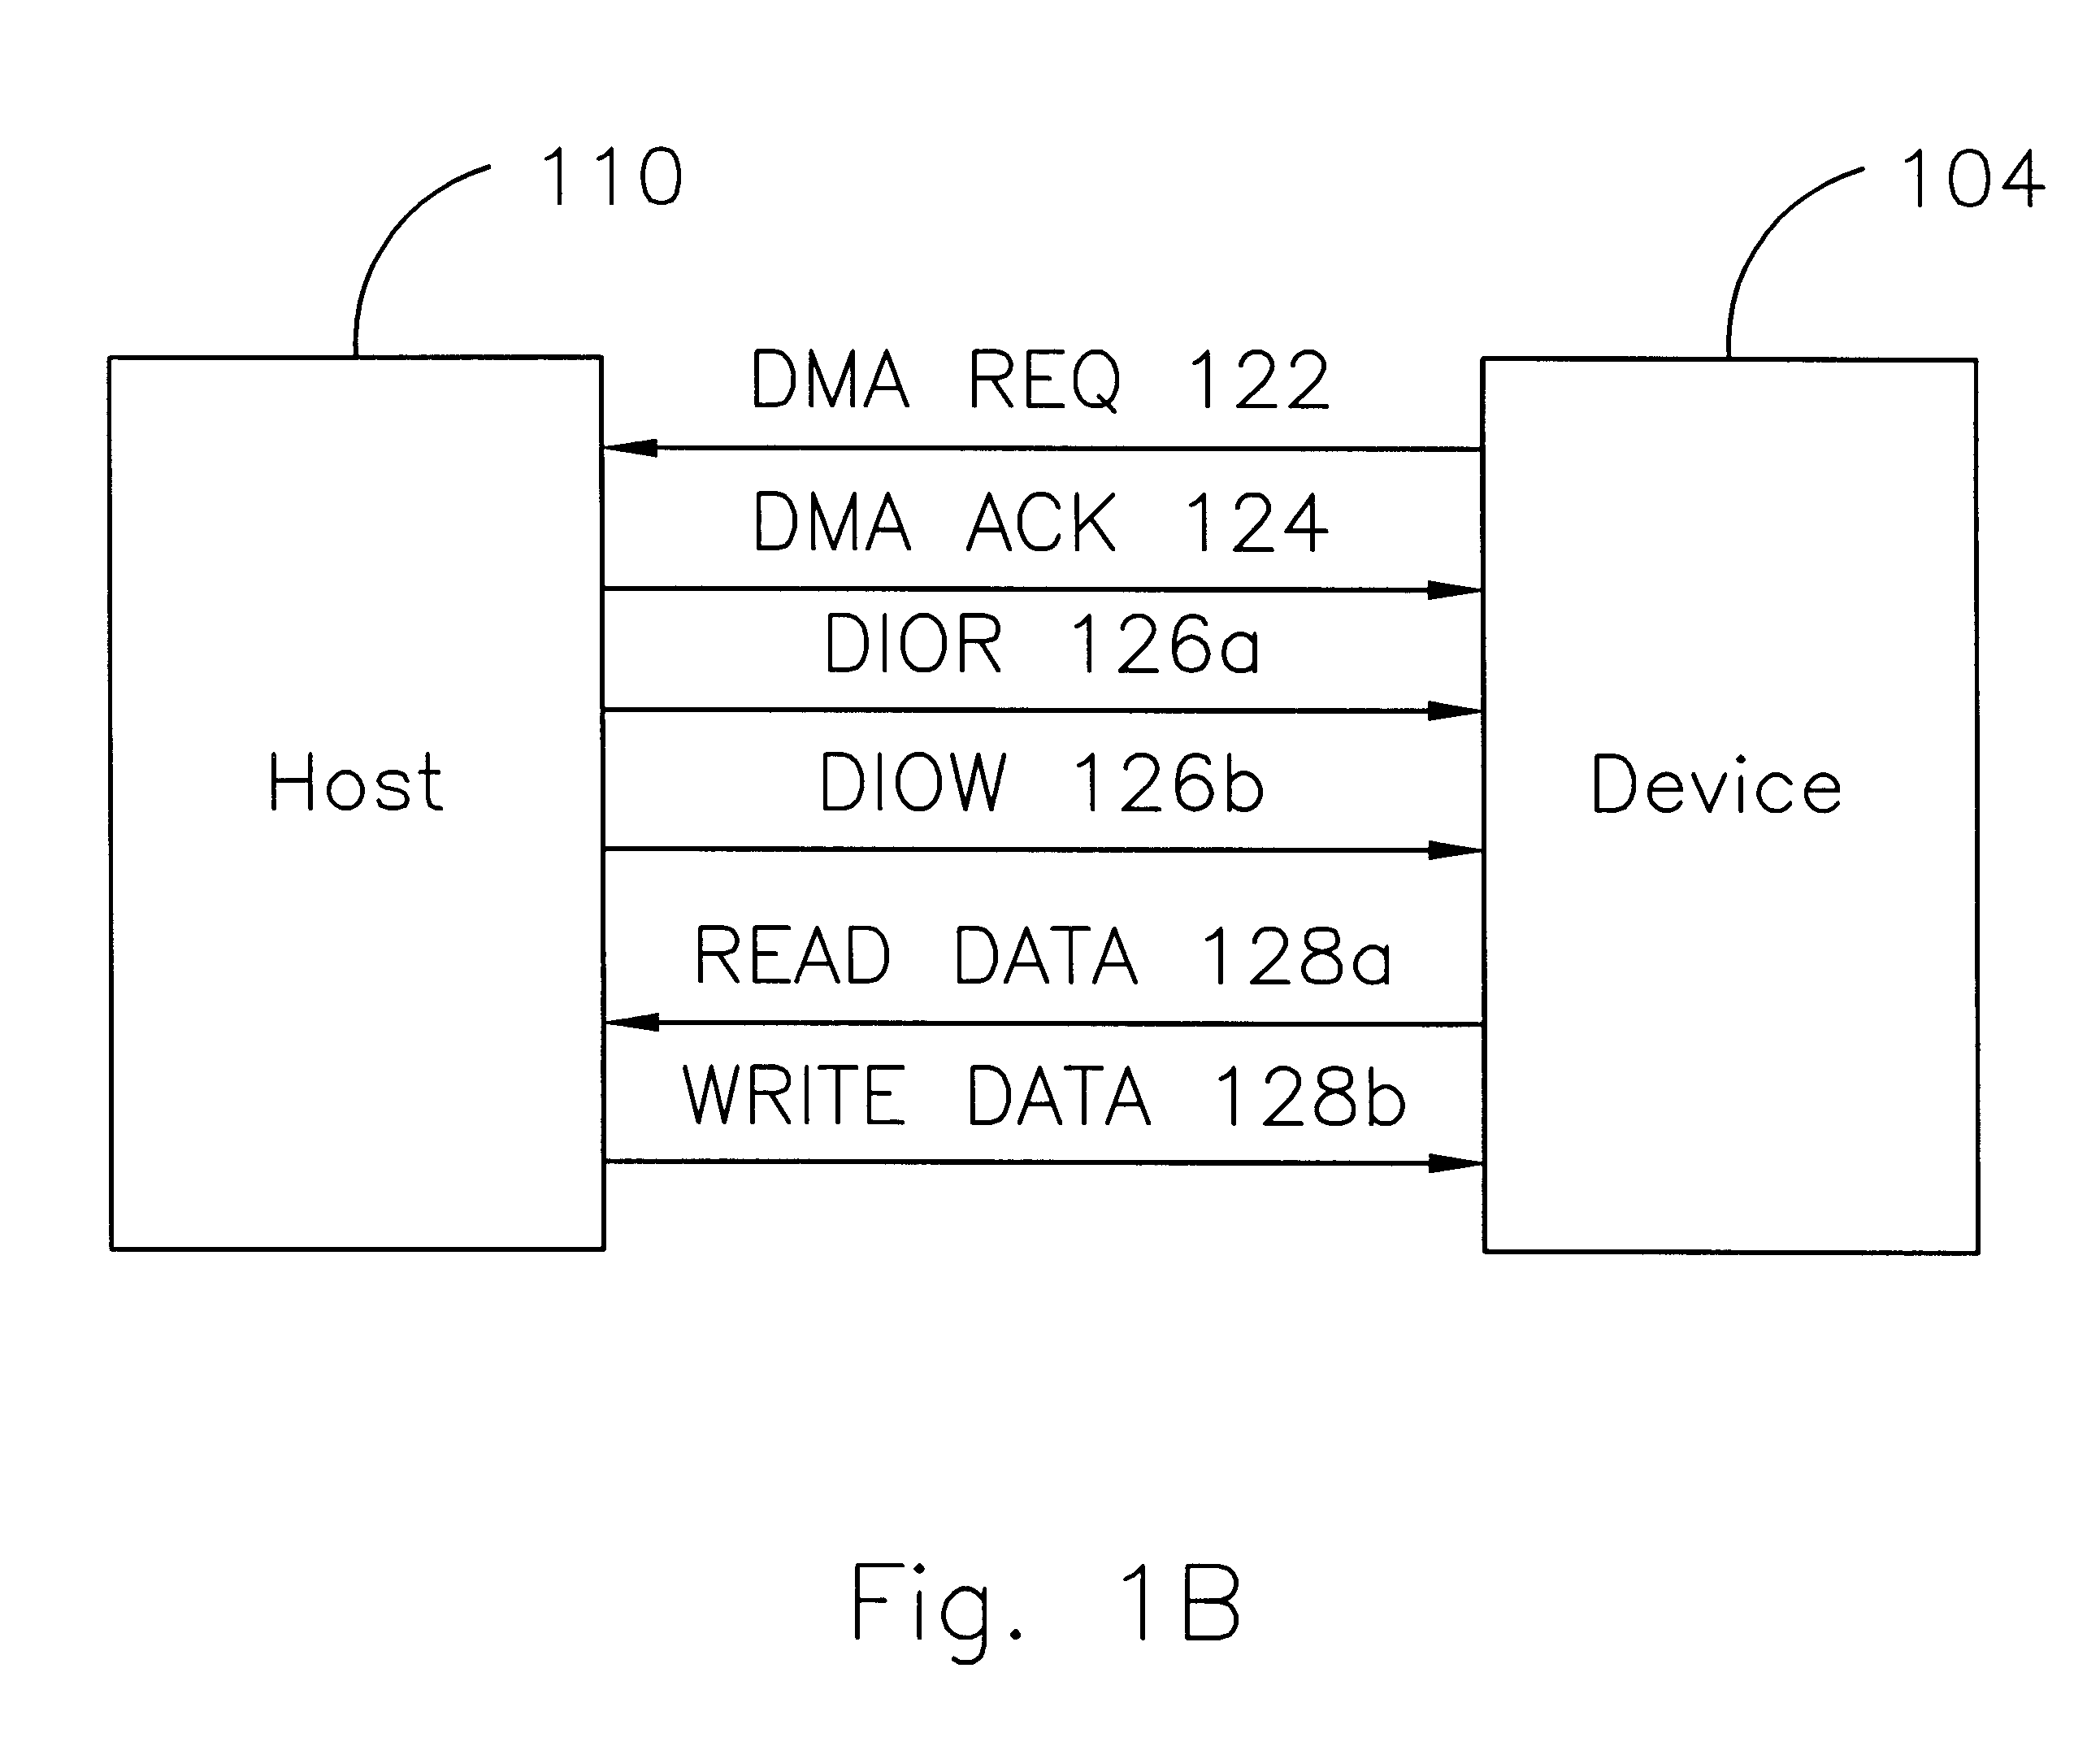 Fast ATA-compatible drive interface with error detection and/or error correction